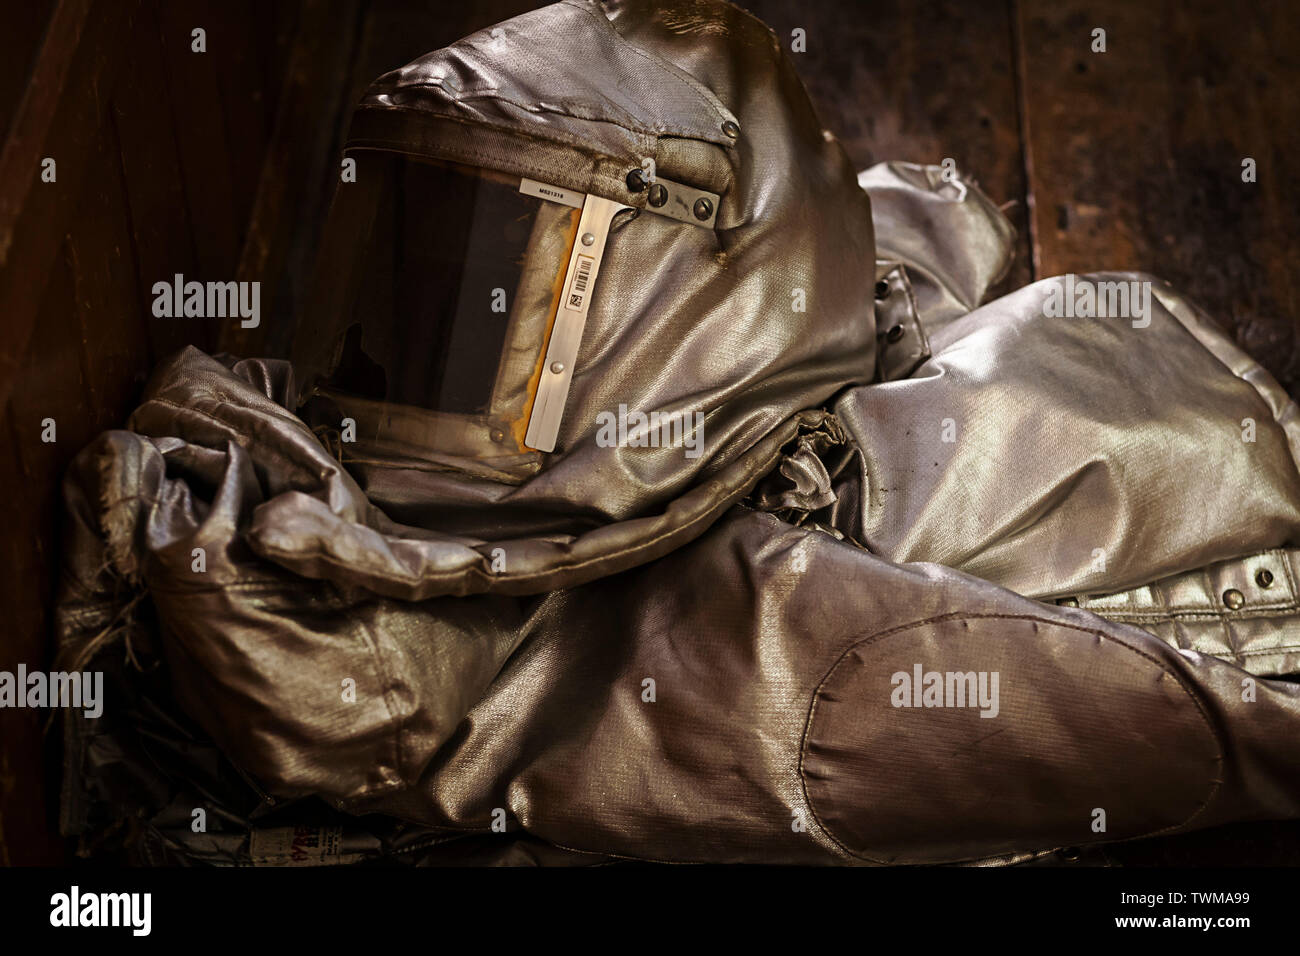 A folded up slightly damaged fire proximity suit also known as a bunker suit on a wooden floor. There is a visible hole in the visor of the suit. Stock Photo